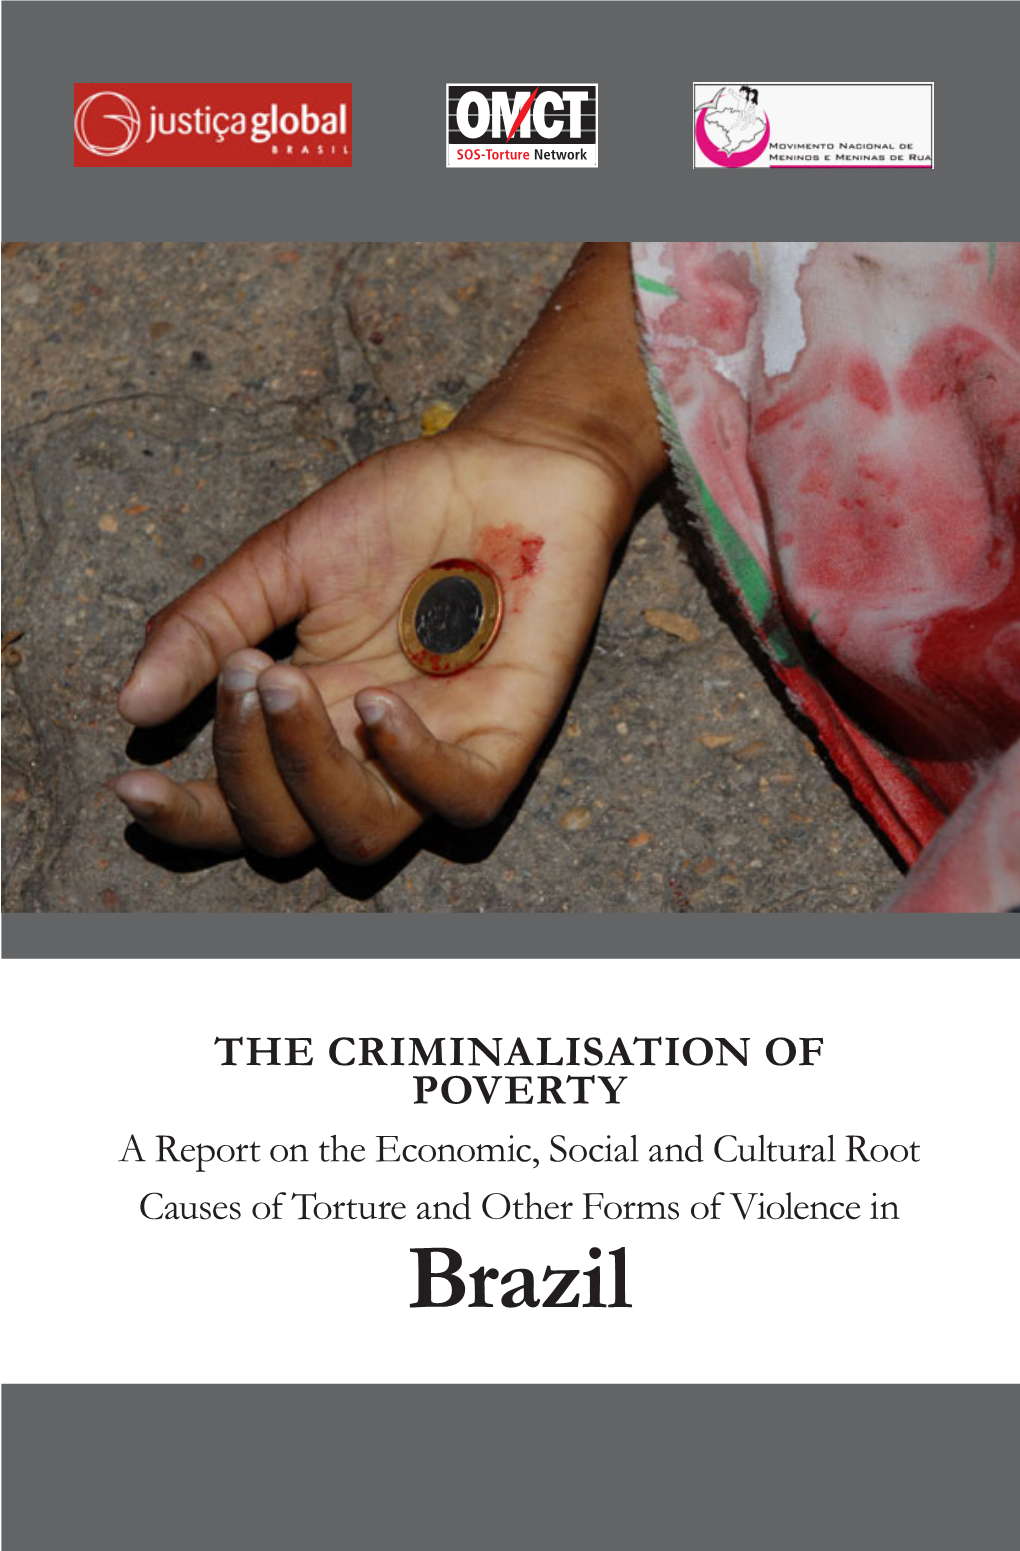 Brazil: an Alternative Report to the UN Committee on Economic, Social and Cultural Rights